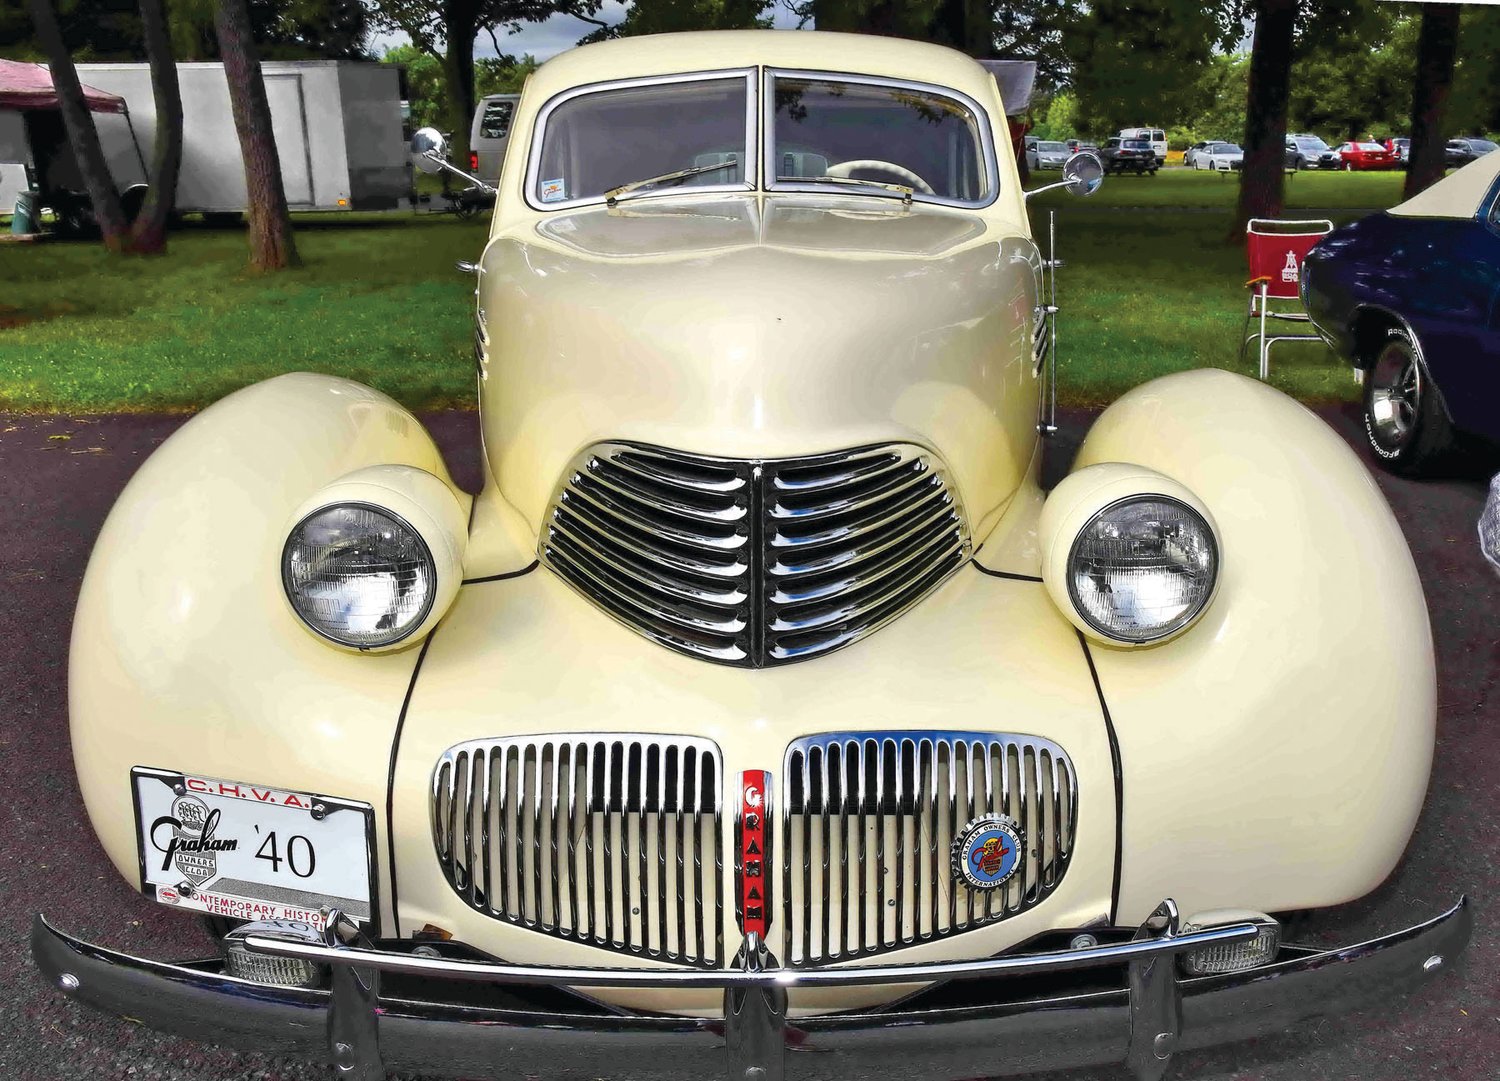 Front view of a rare 1940 Graham.